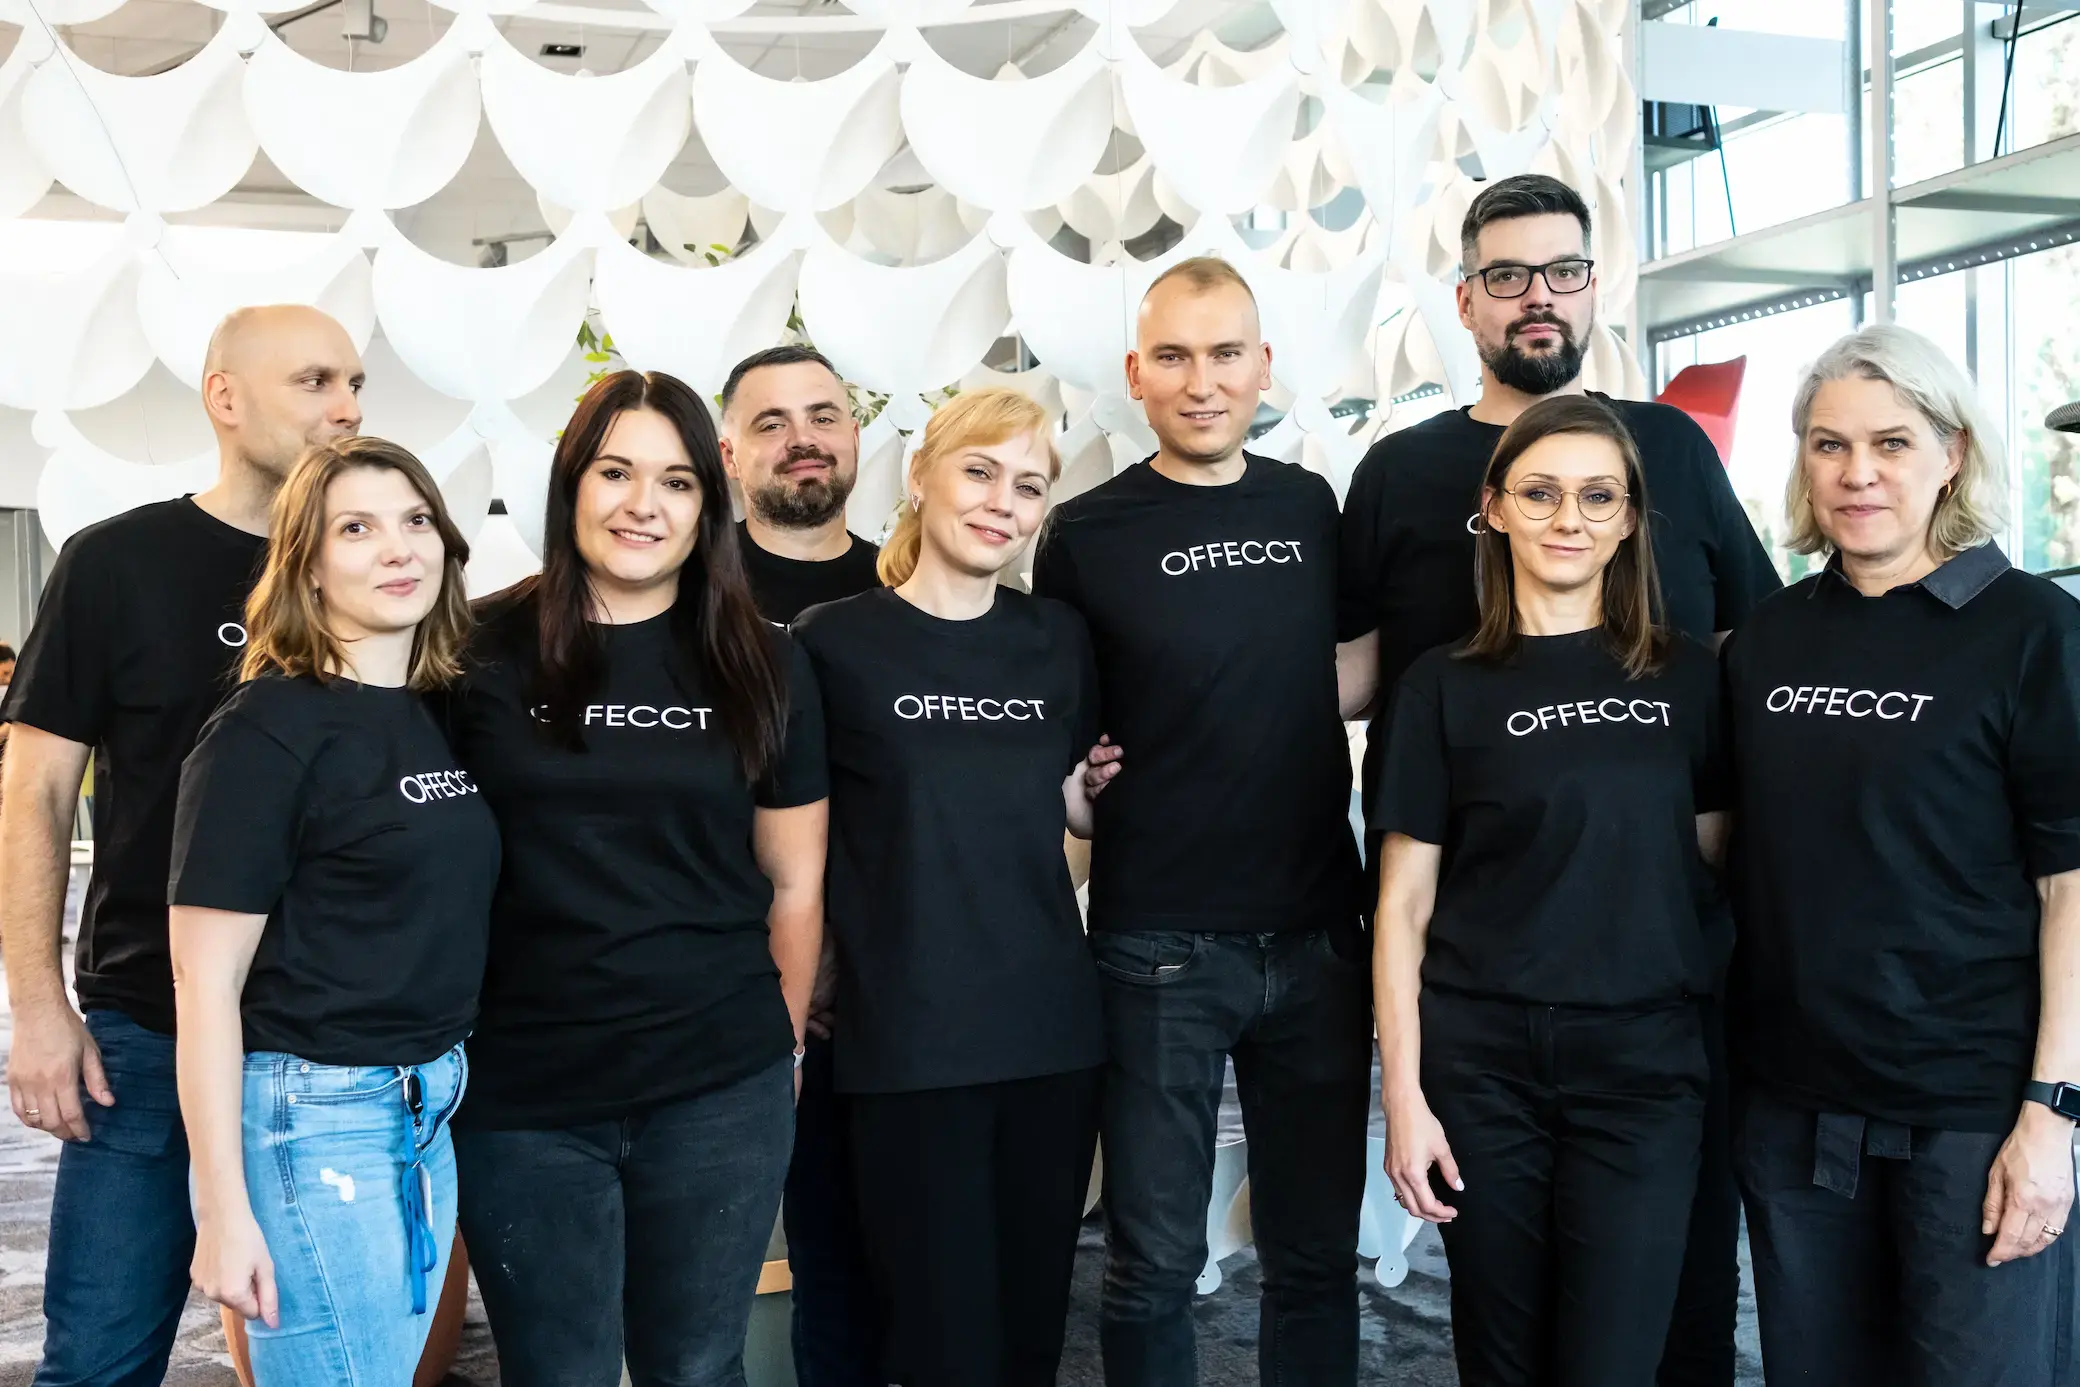 The Offecct team